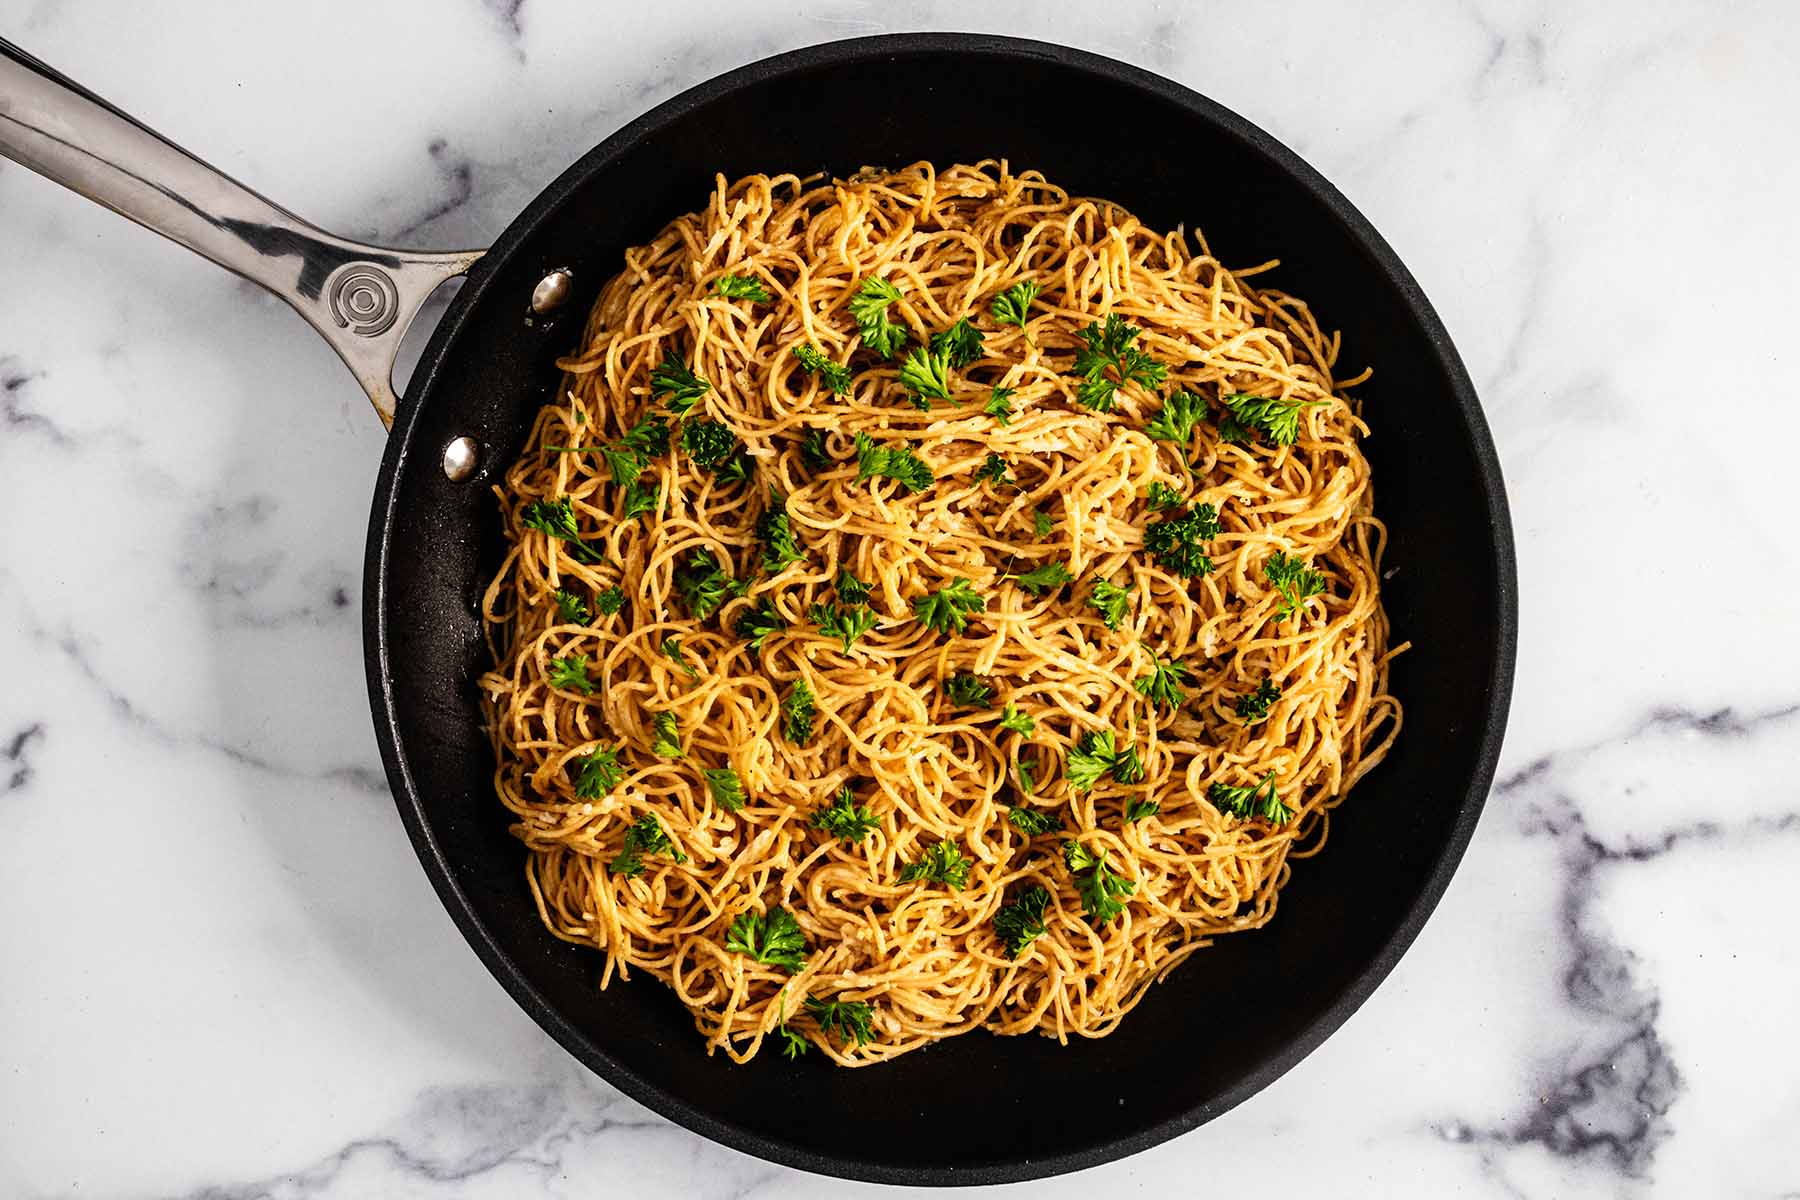 Noodles garnished with curly leaf parsley in a skillet.